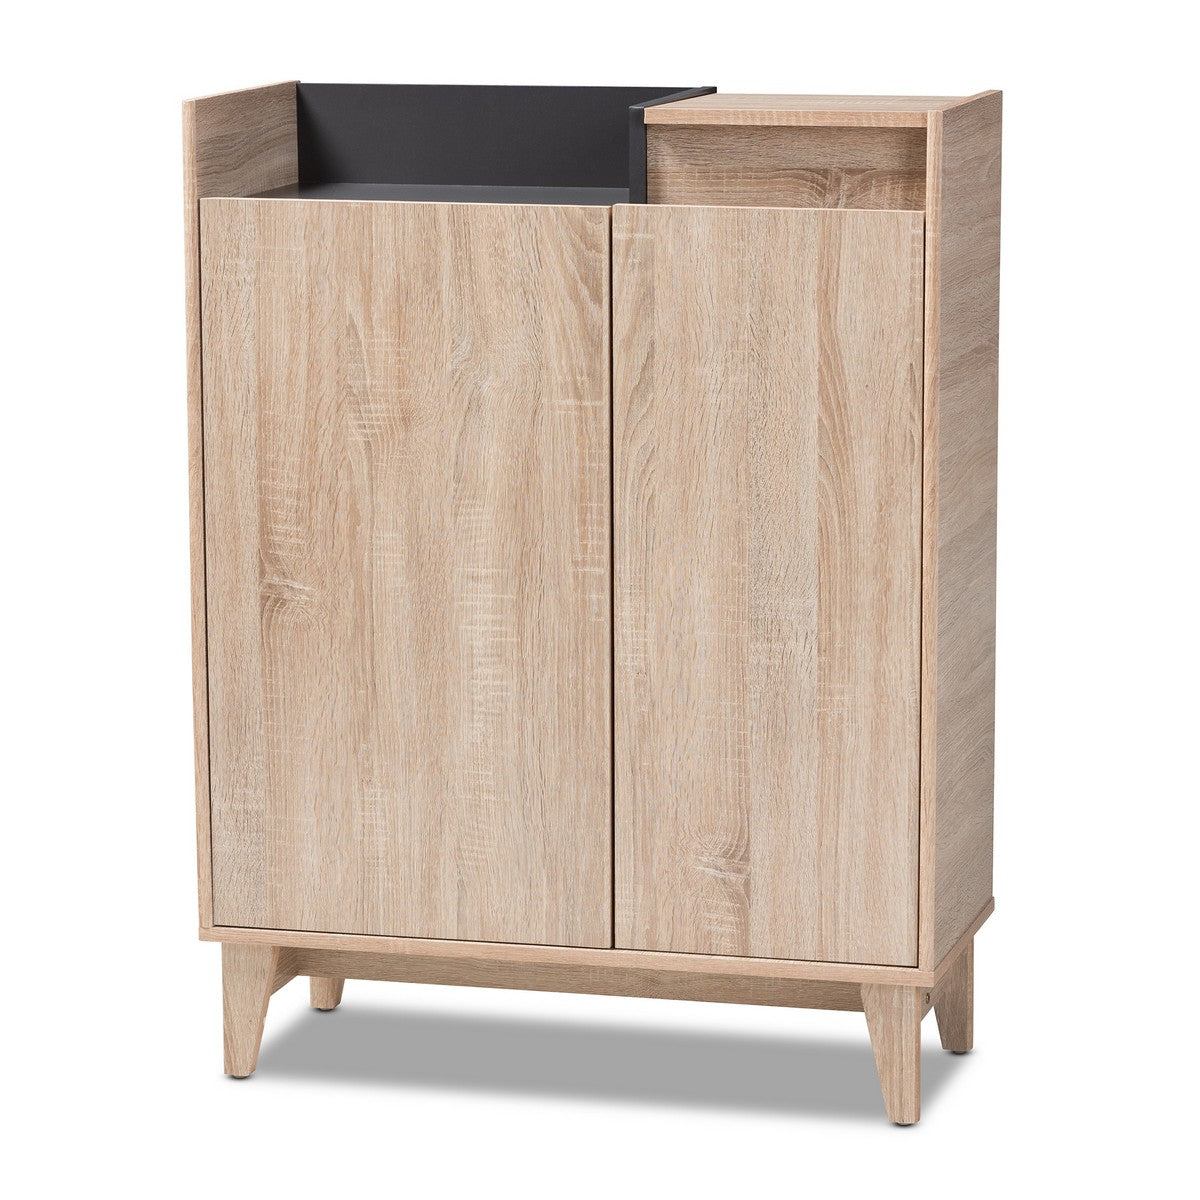 Baxton Studio Fella Mid-Century Modern Two-Tone Oak Brown and Dark Gray Entryway Shoe Cabinet with Lift-Top Storage Compartment Baxton Studio-Shoe Cabinets-Minimal And Modern - 1